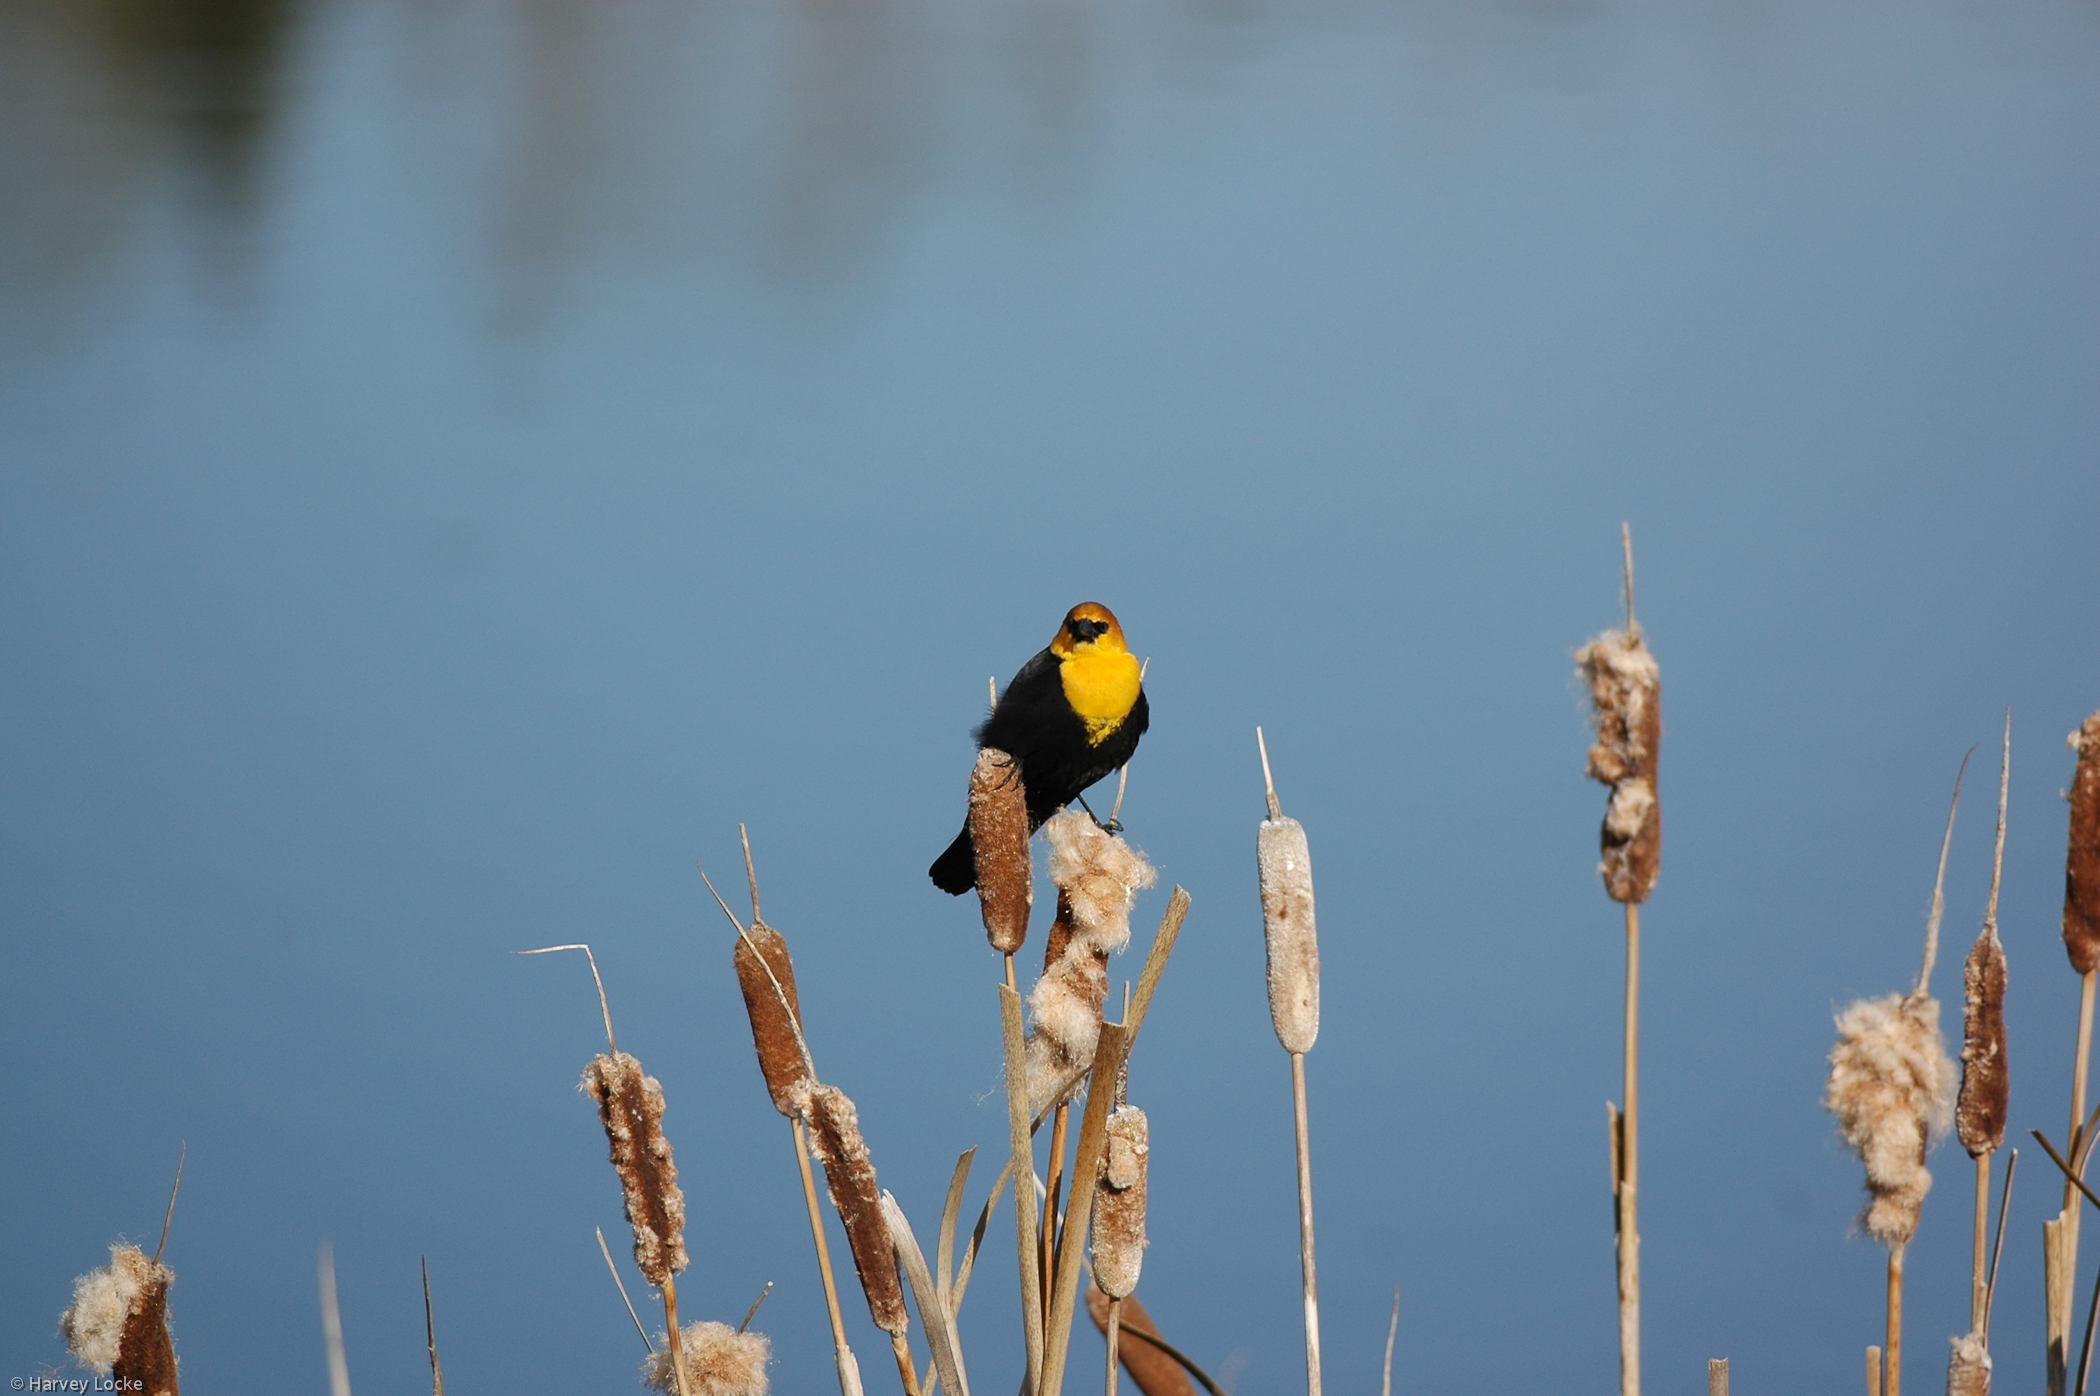 A bird with black and orange feathers sits on a bullrush near water